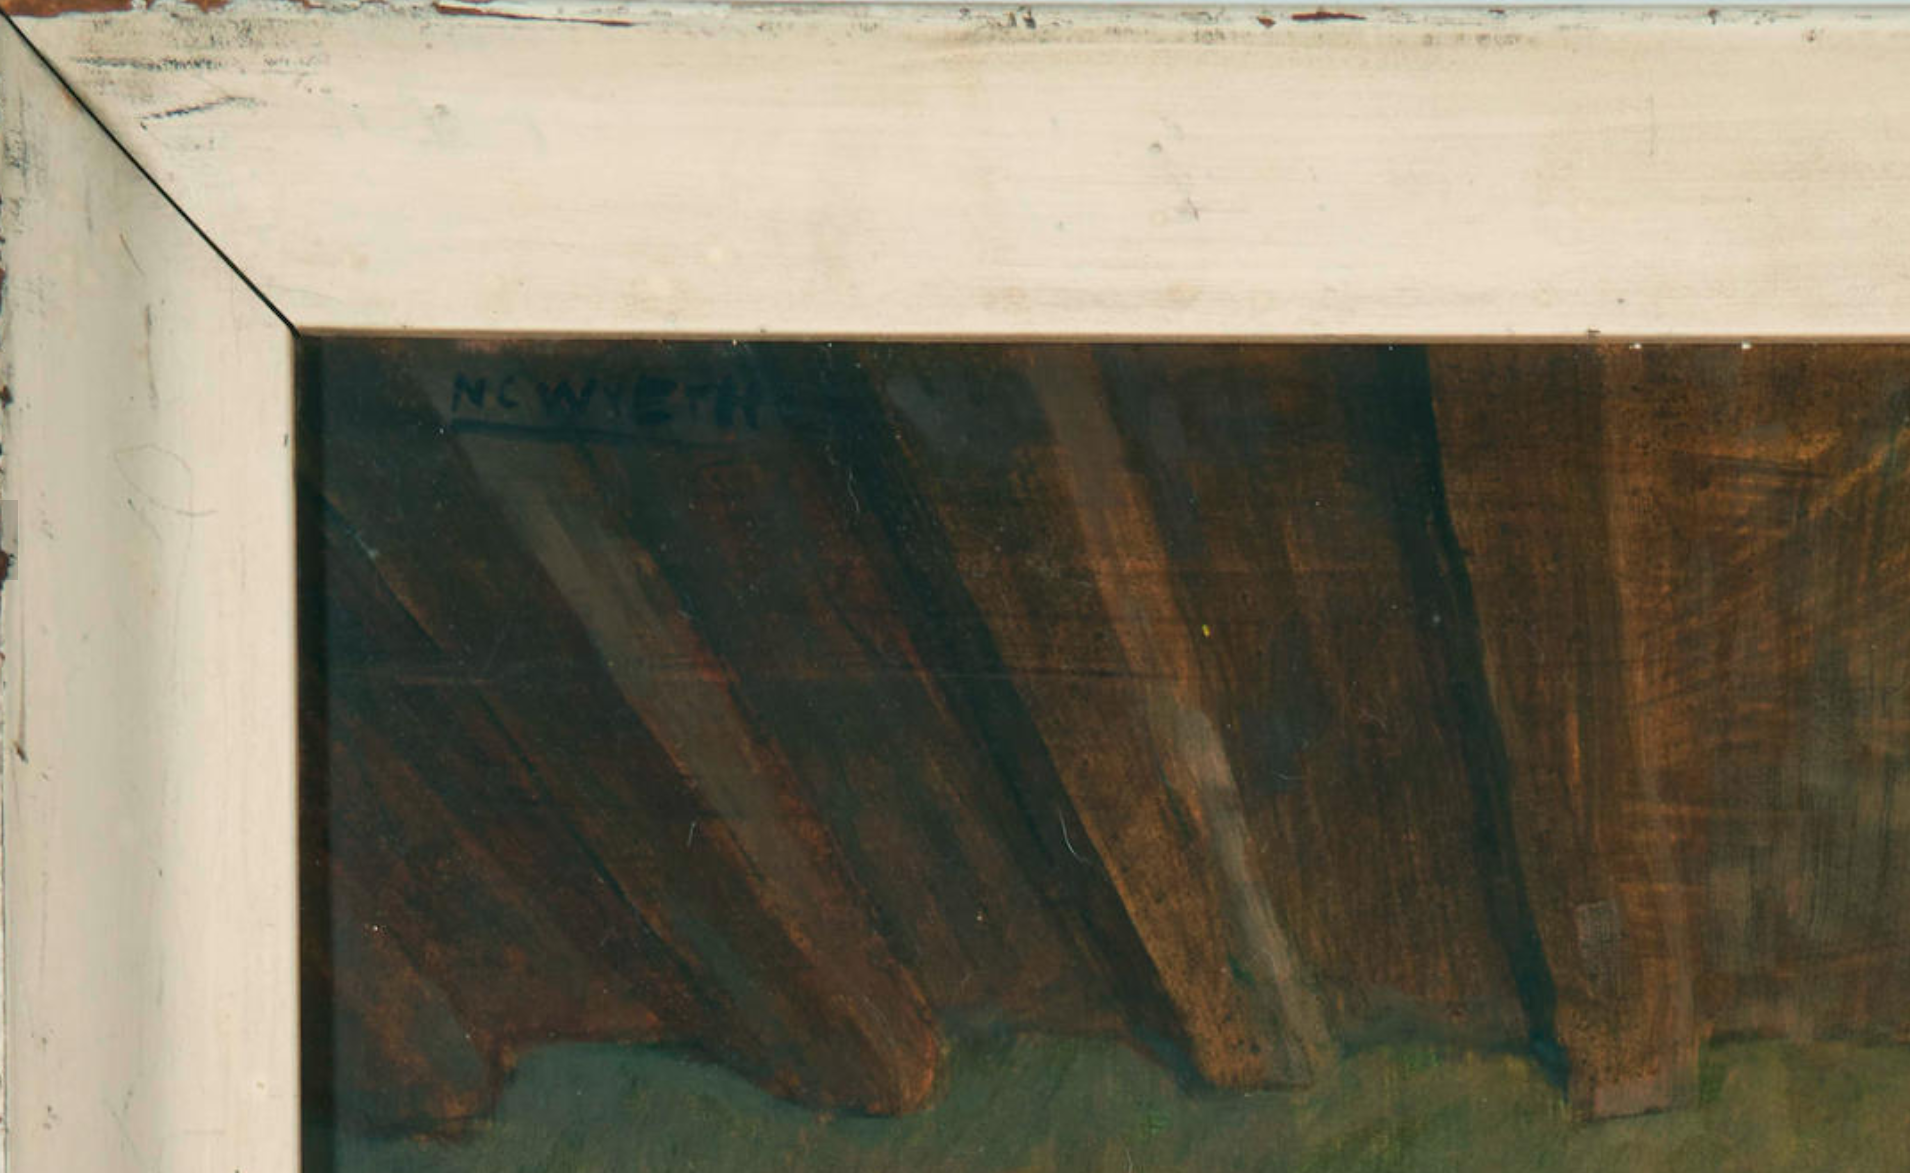 A close up of the signature N C Wyeth written in black paint, disguised in the shadows of a dimly-lit rafters.